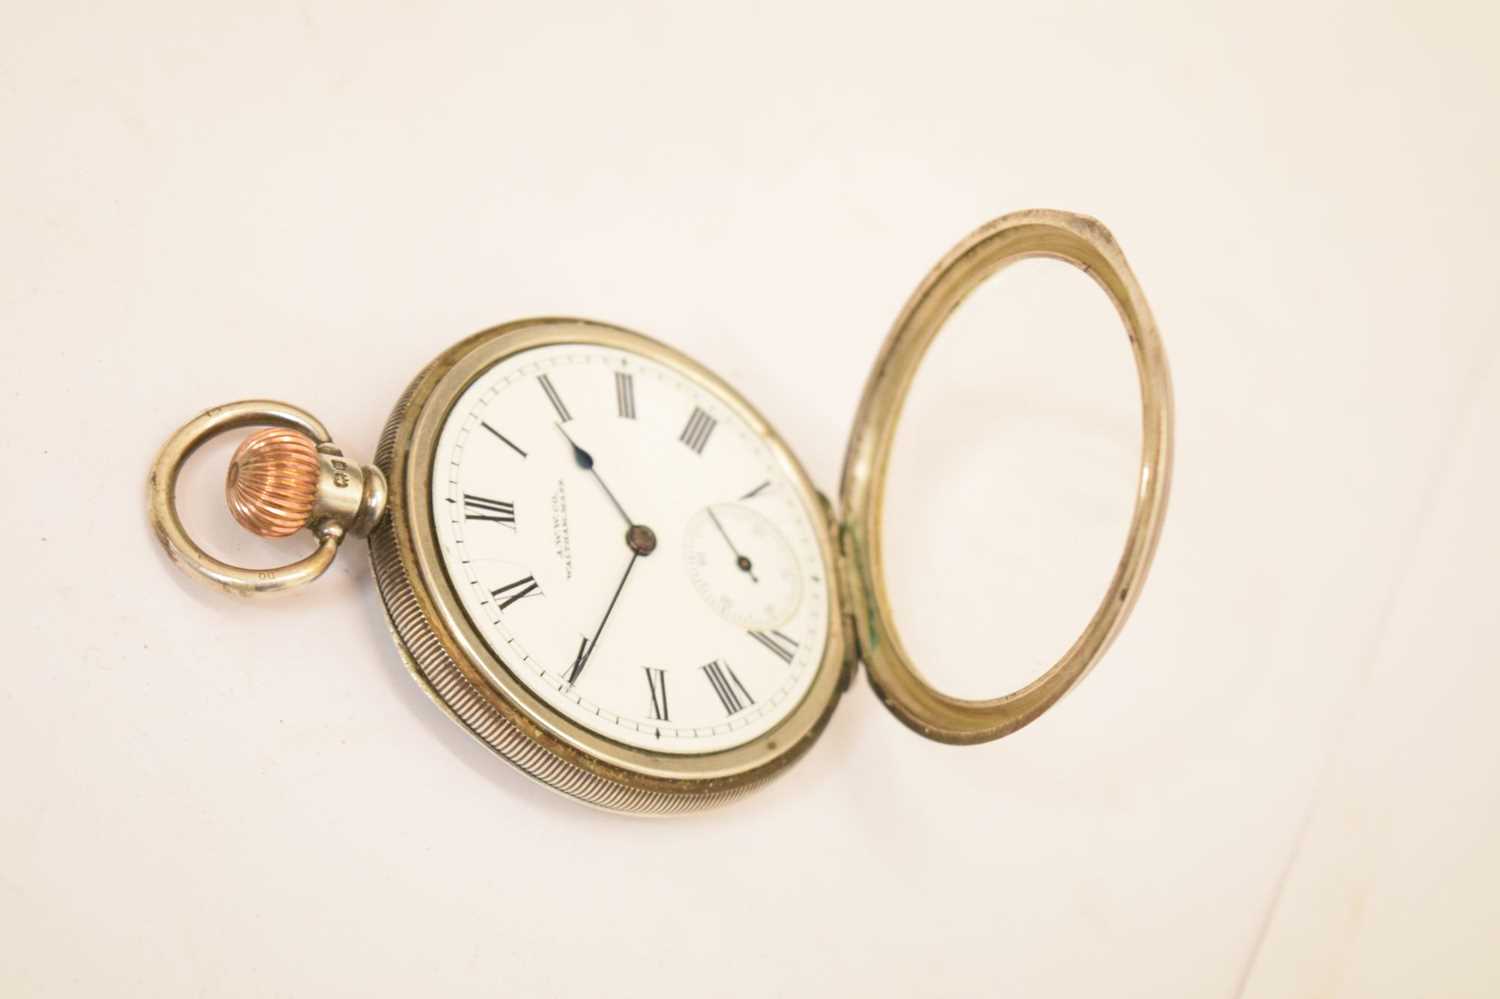 American Waltham Watch Co. - Top wind silver cased pocket watch - Image 13 of 15